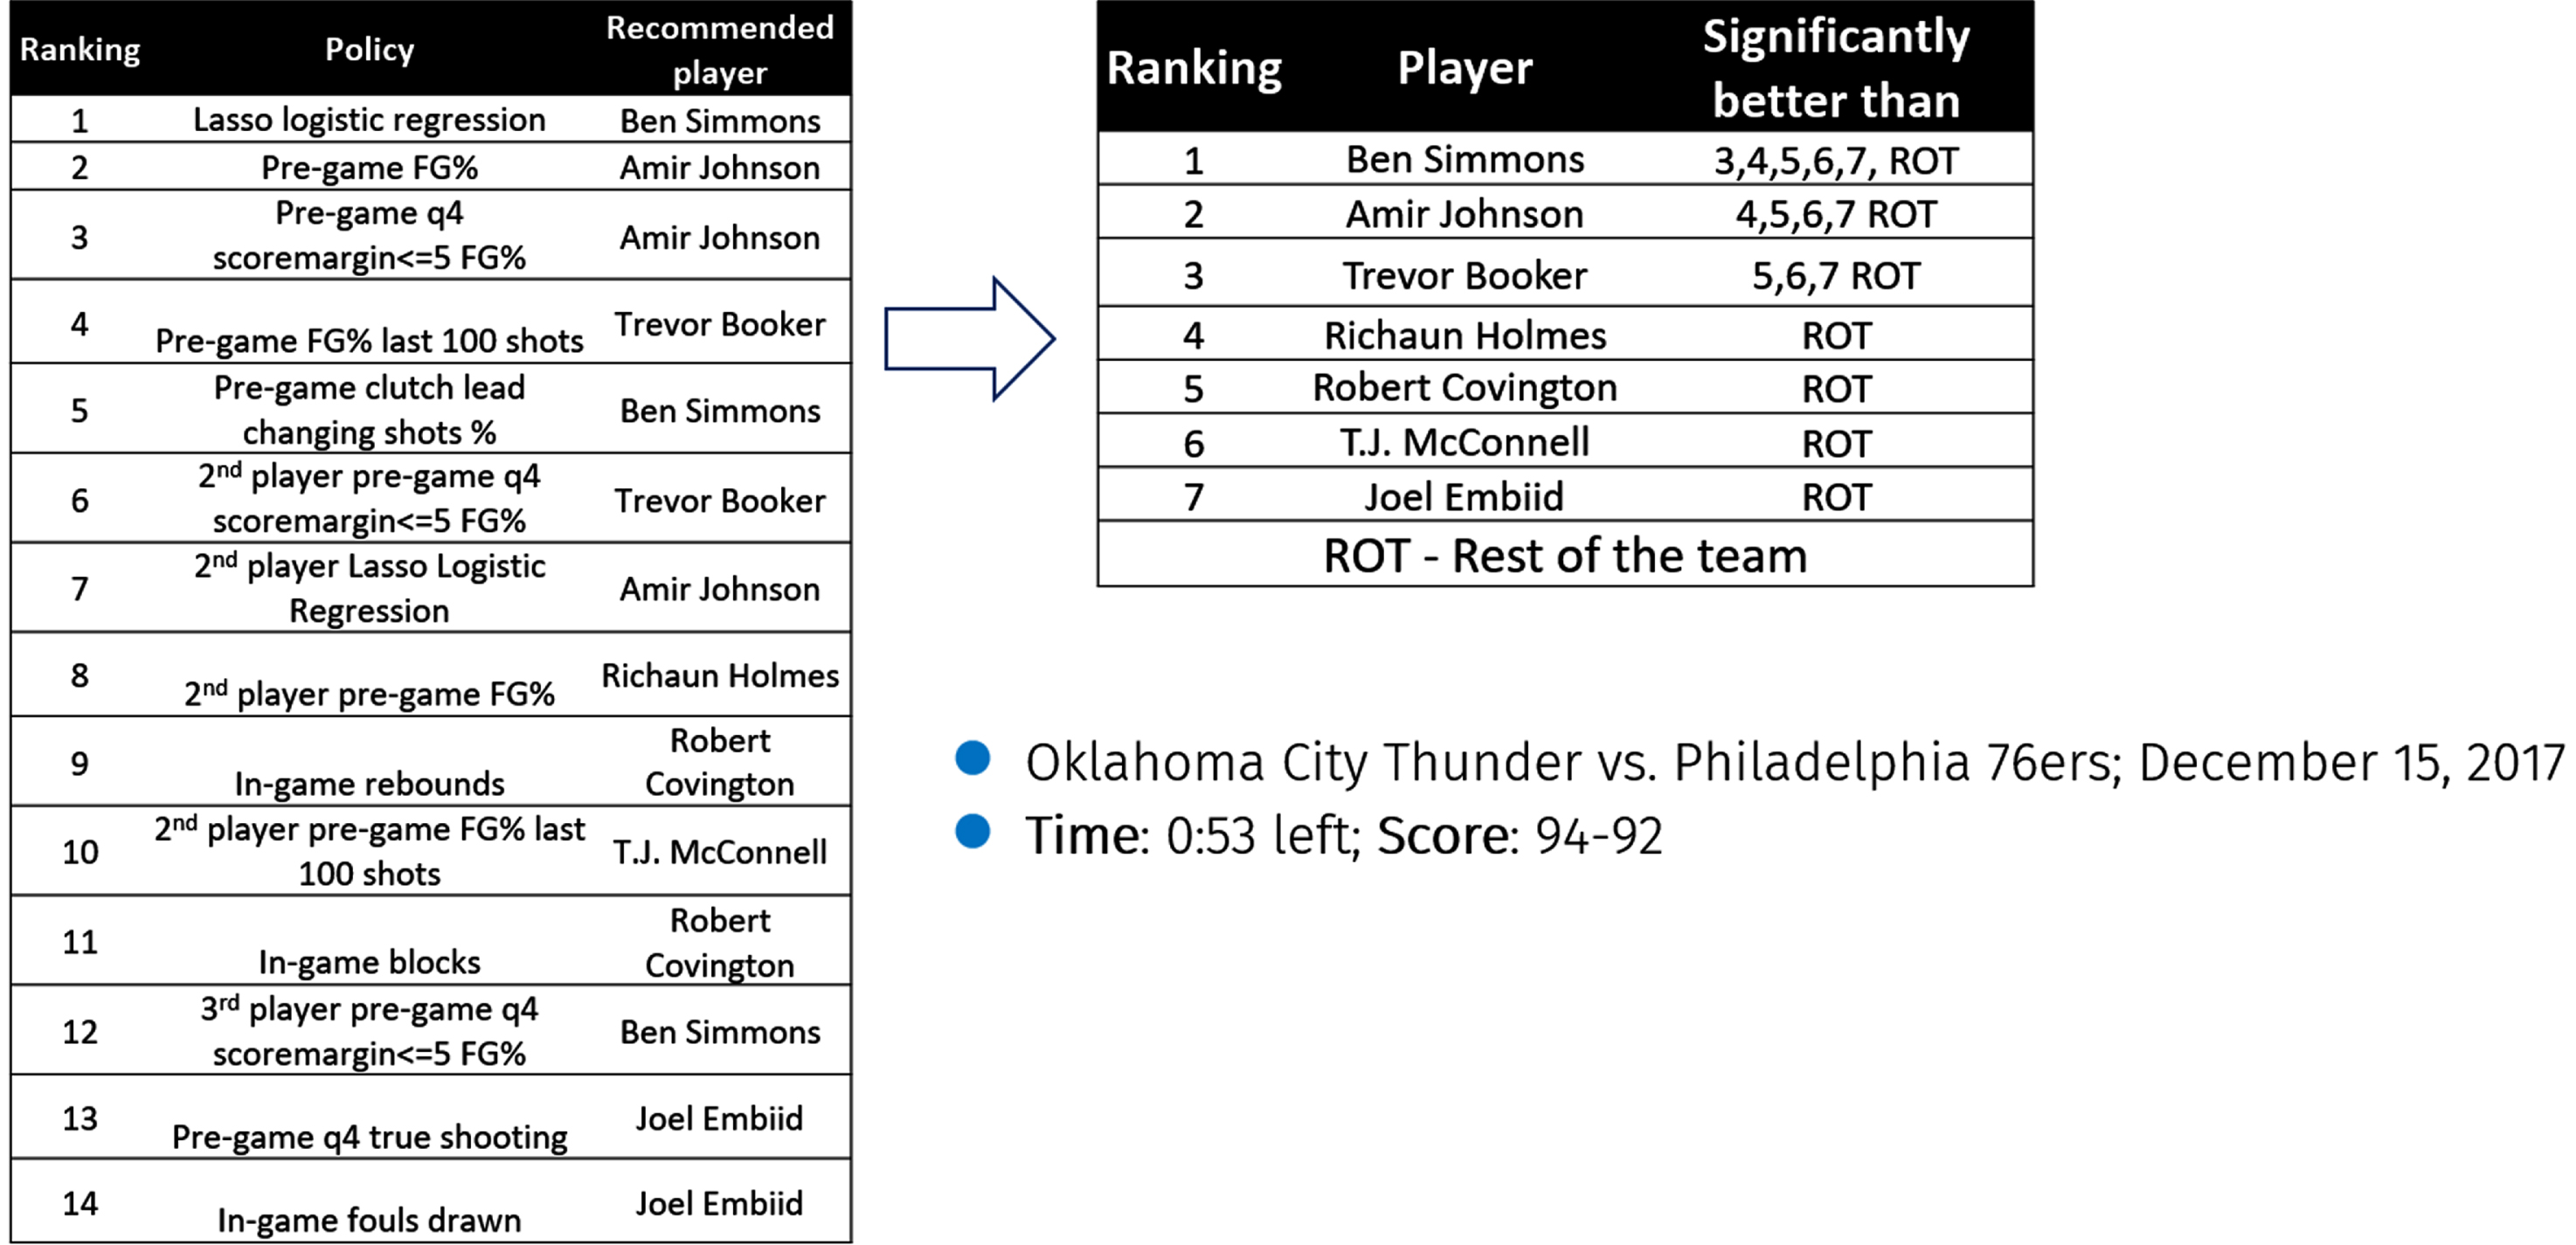 Example of real-time players ranking from 2017, Philadelphia 76ers.